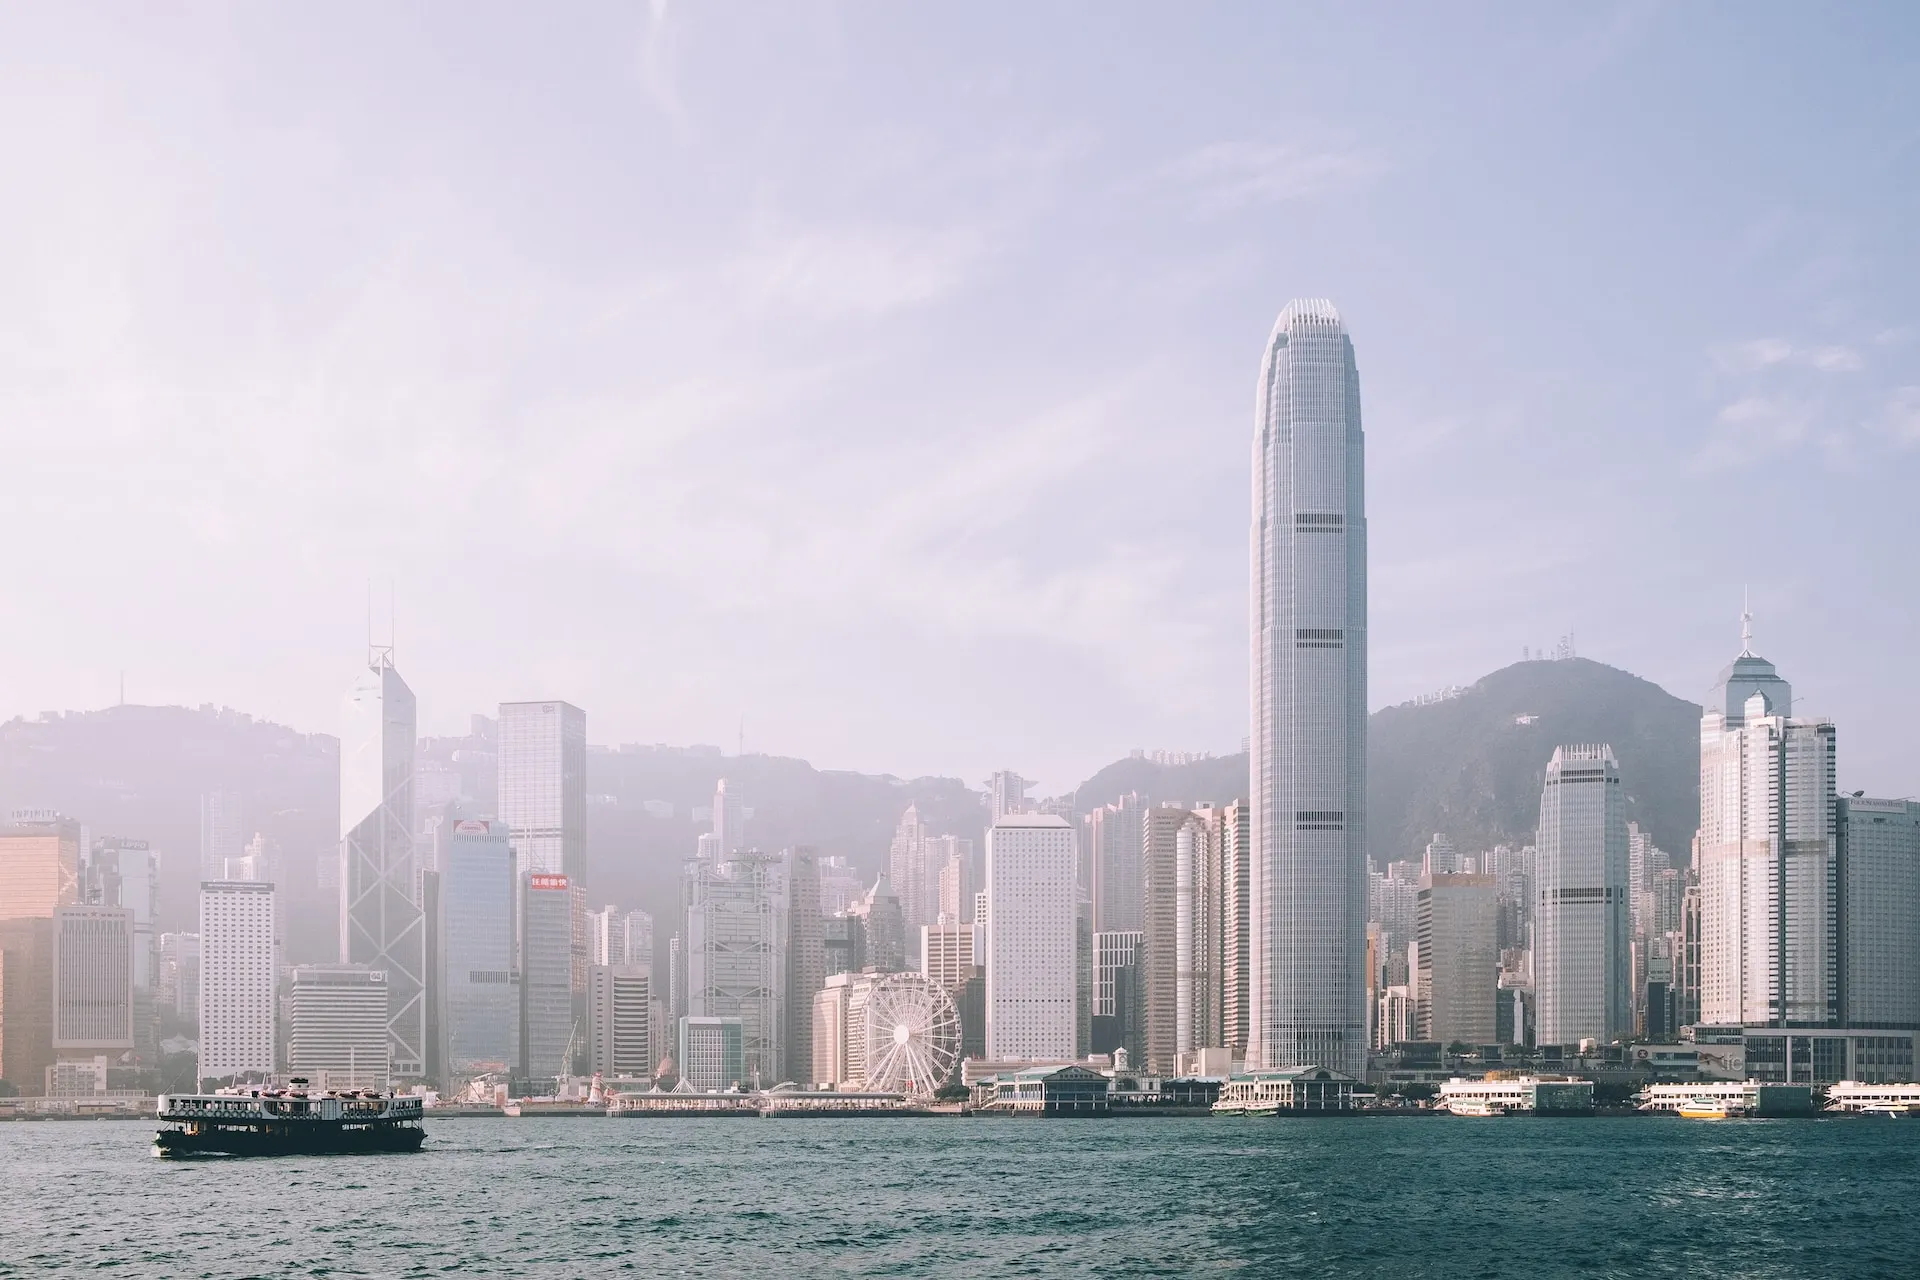 Skyline of Hong Kong. Source: Photo by Ryan Le on Unsplash